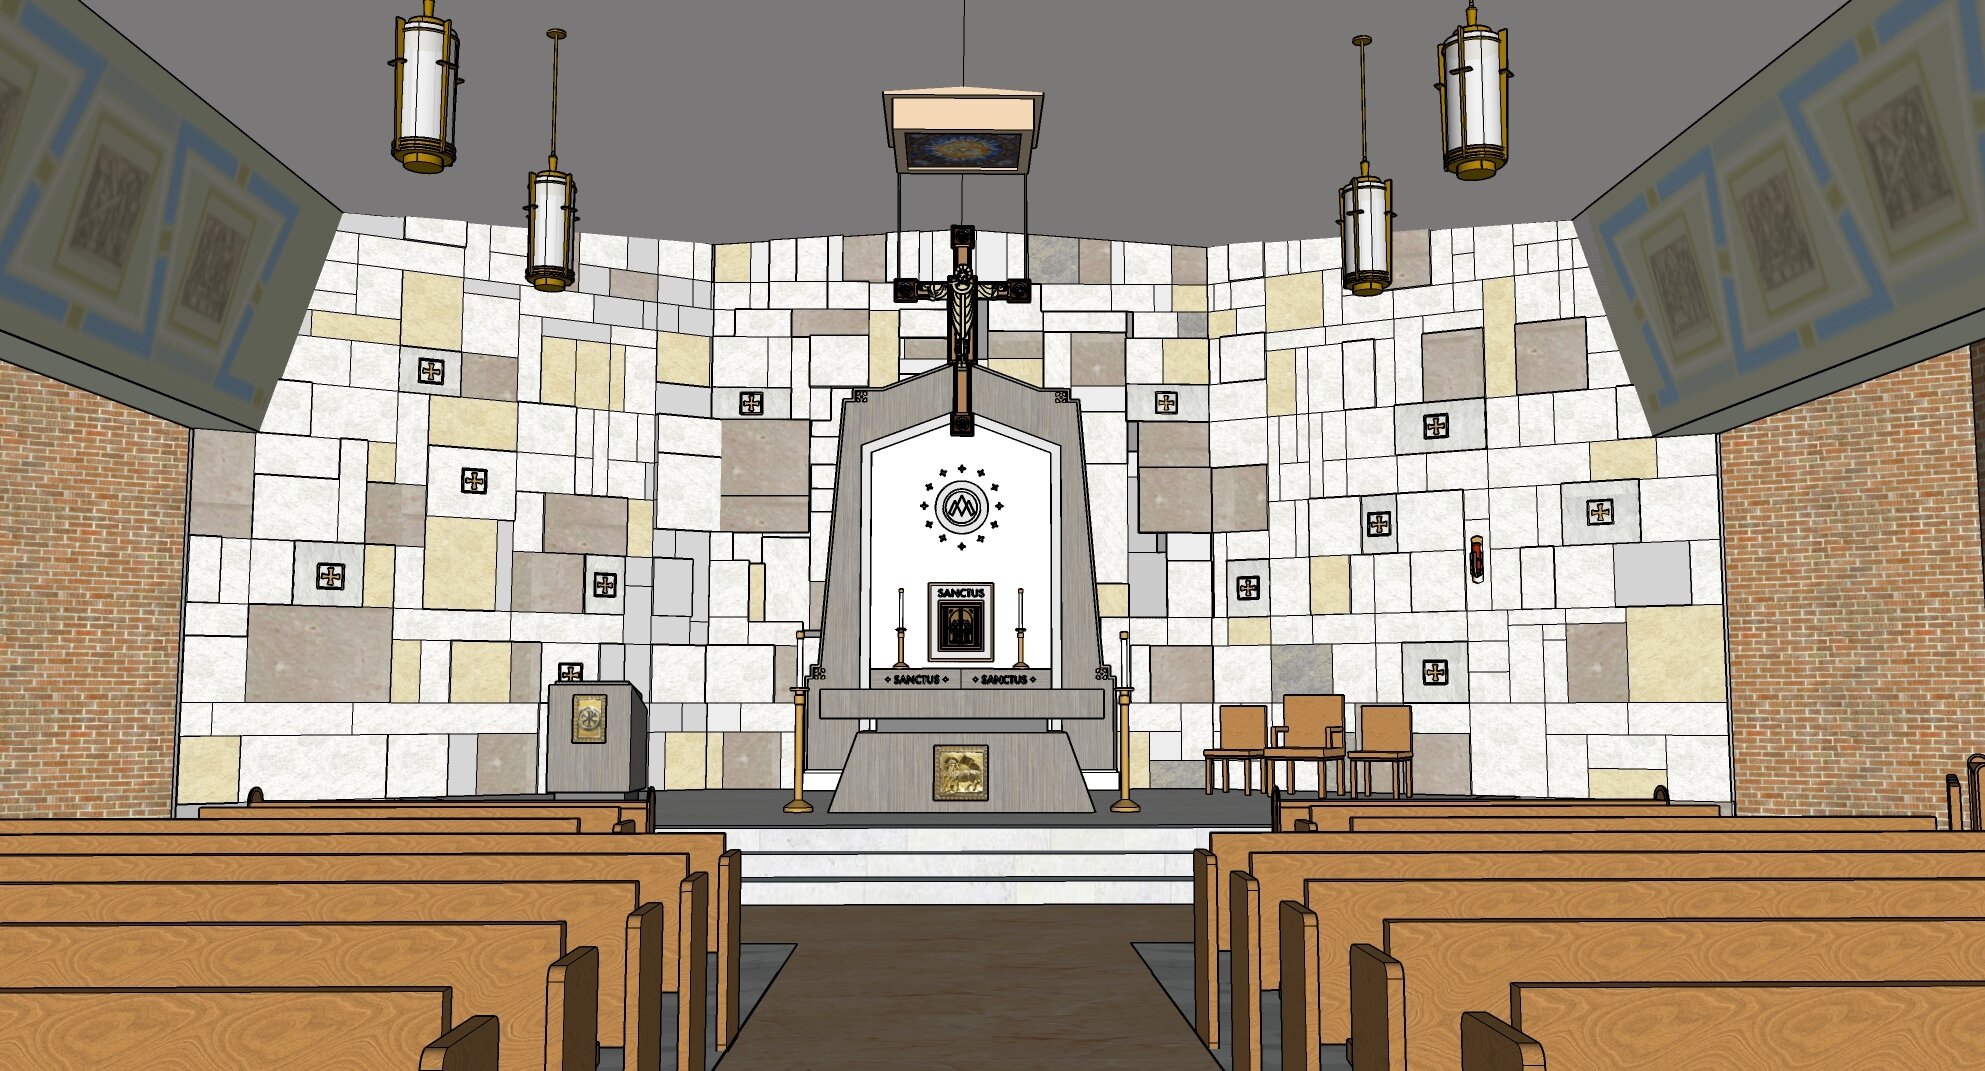   Proposed renovation to church interior  